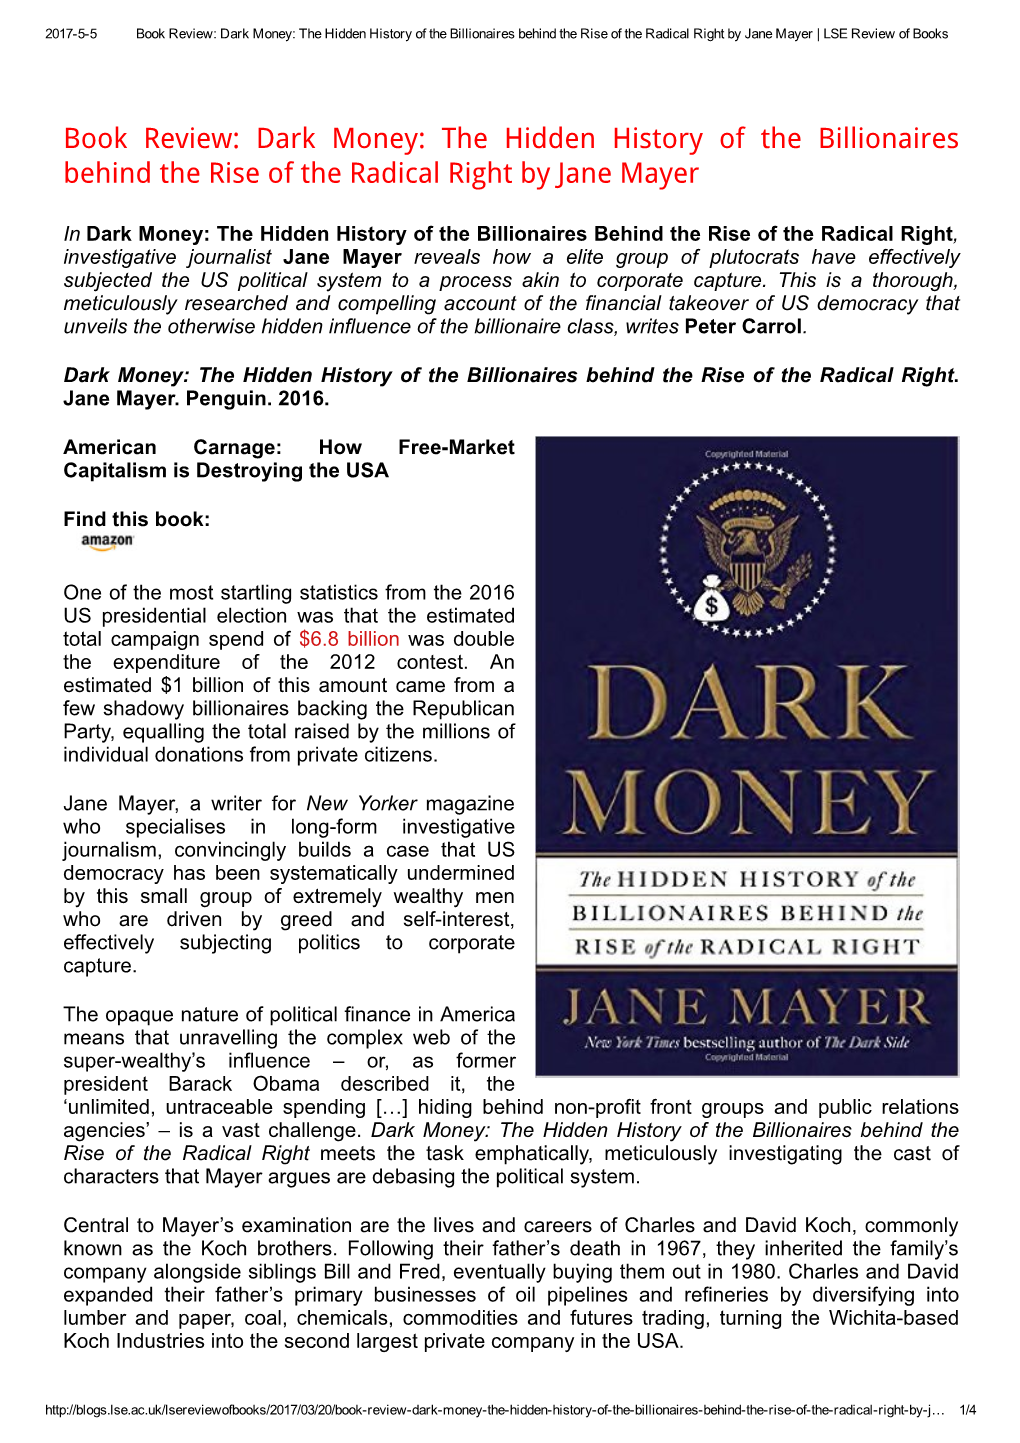 Book Review: Dark Money: the Hidden History of the Billionaires Behind the Rise of the Radical Right by Jane Mayer | LSE Review of Books